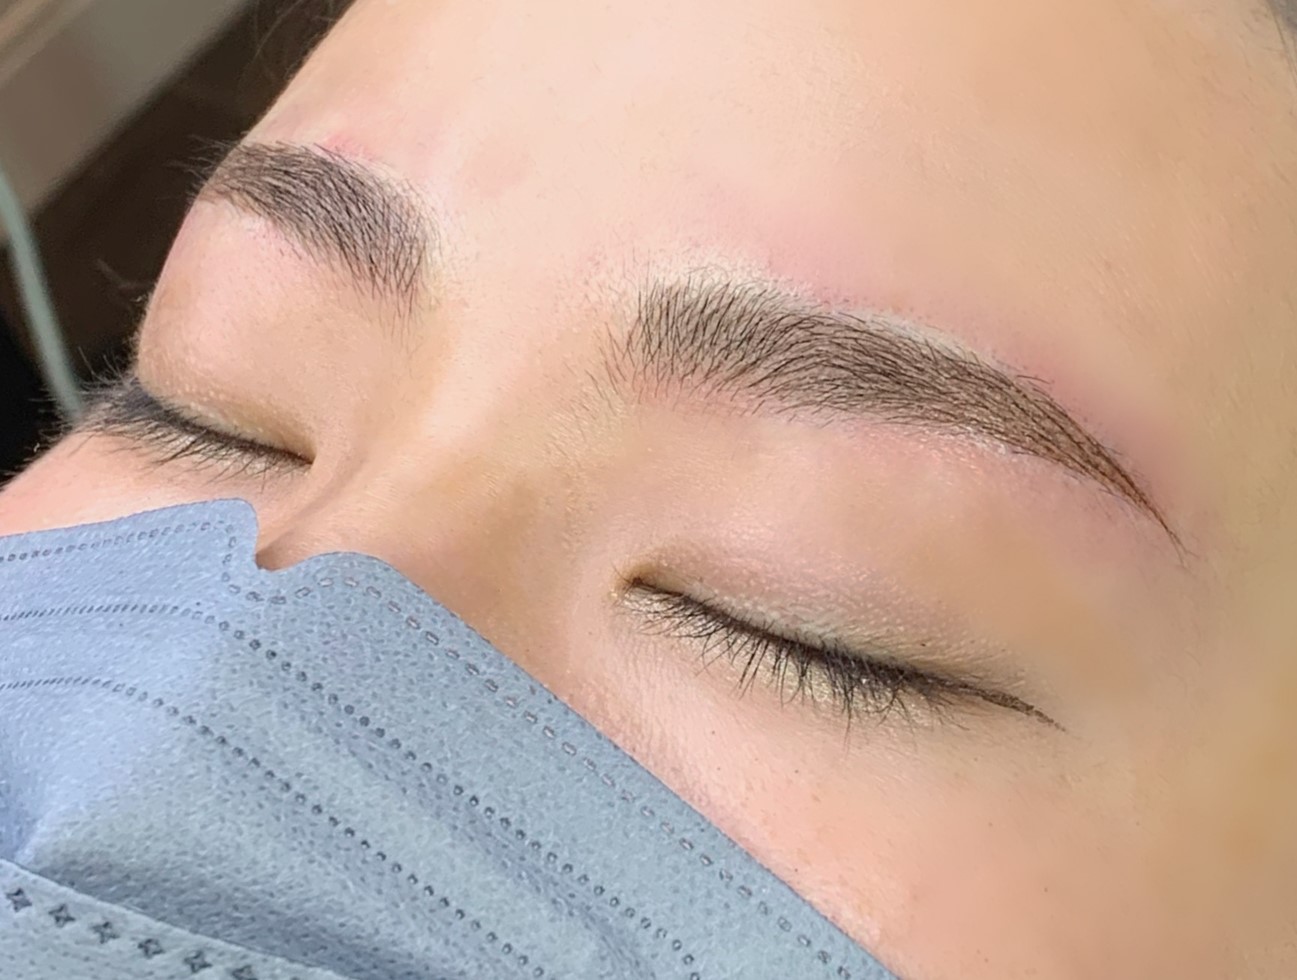 Permanent makeup aftercare: How to help your permanent eyebrows last longer